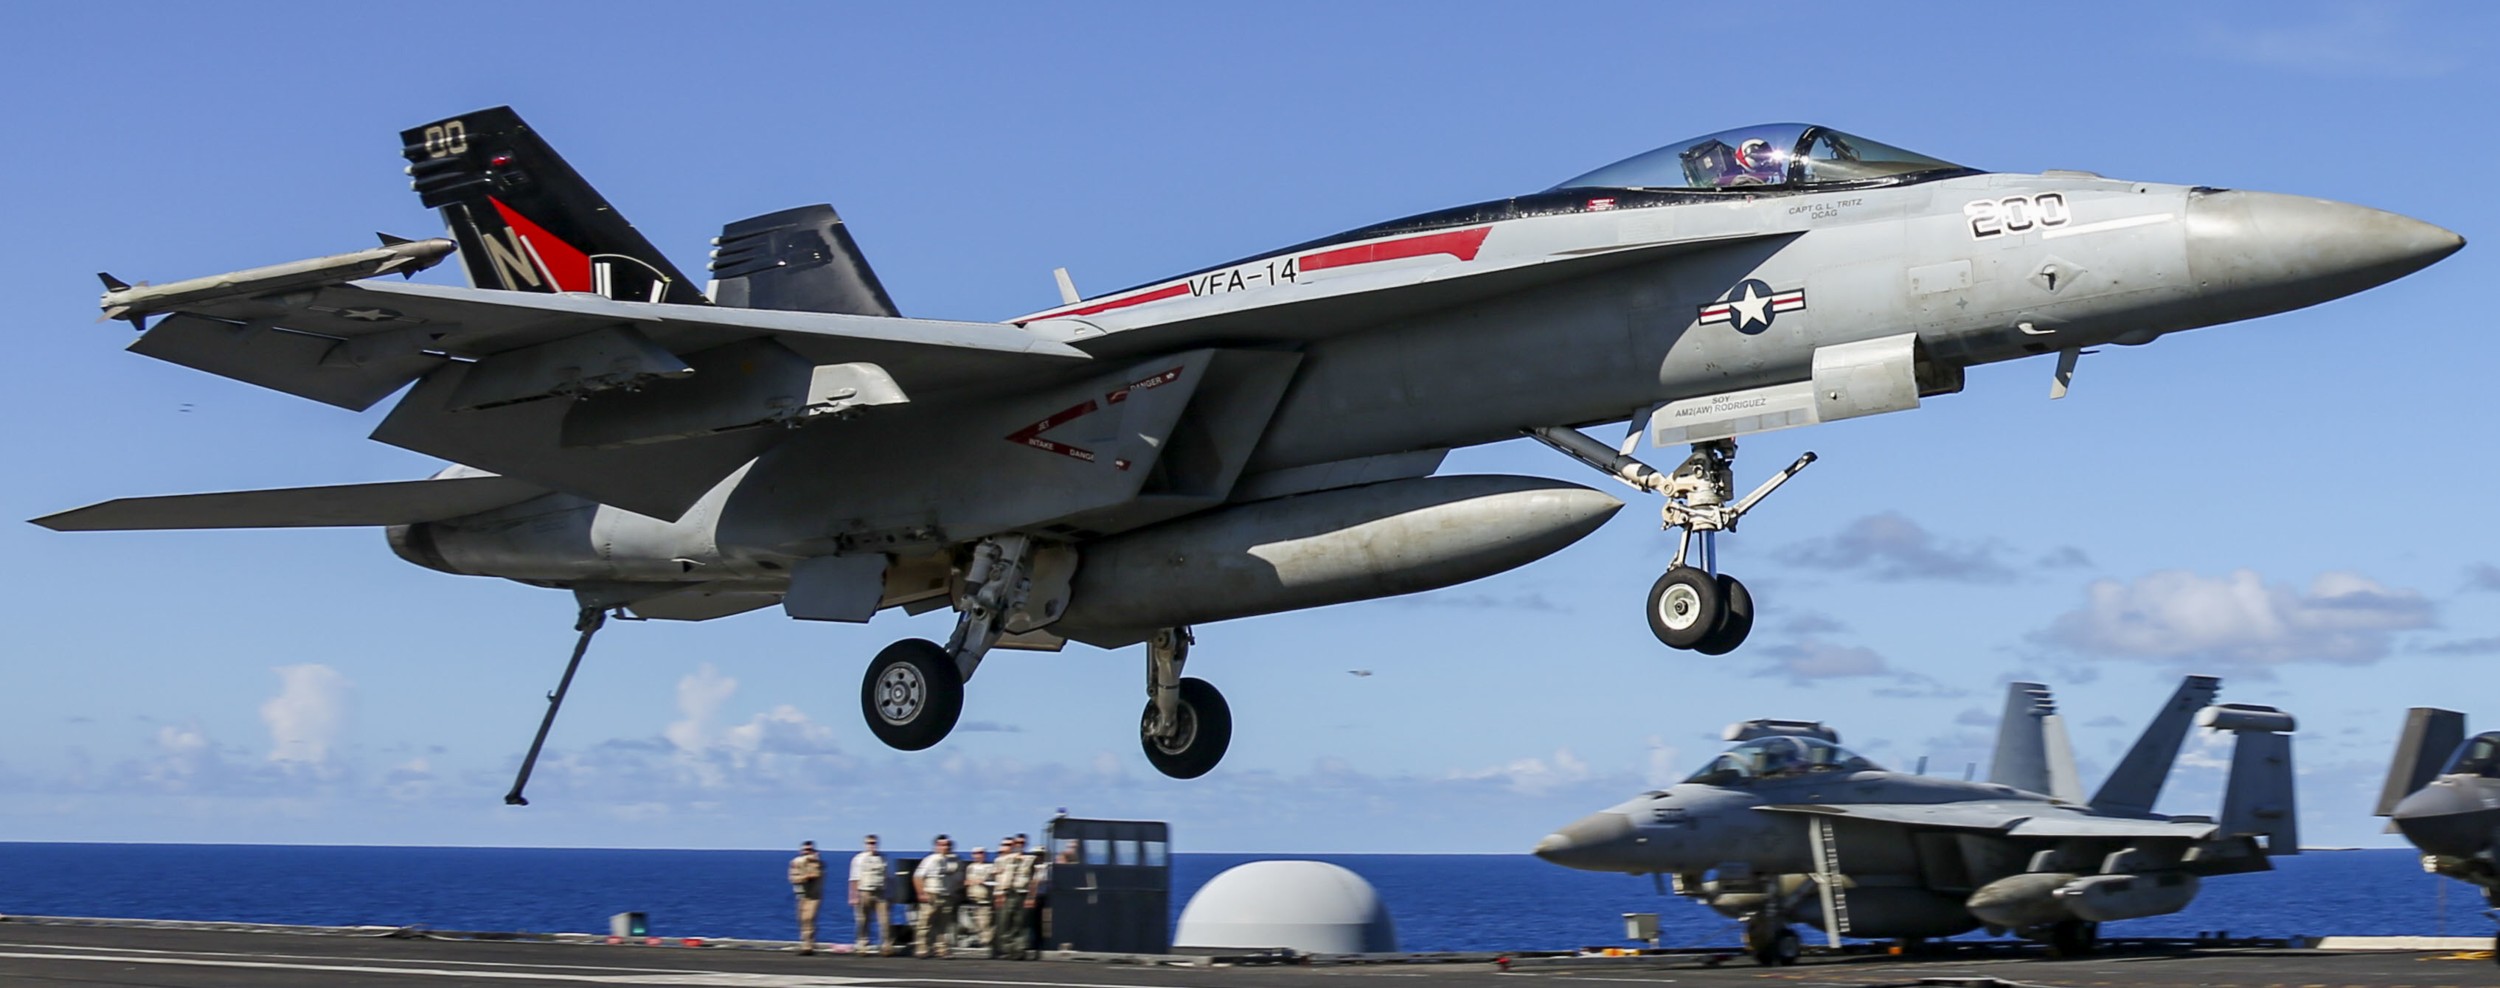 vfa-14 tophatters strike fighter squadron f/a-18e super hornet cvn-72 uss abraham lincoln cvw-9 us navy 90